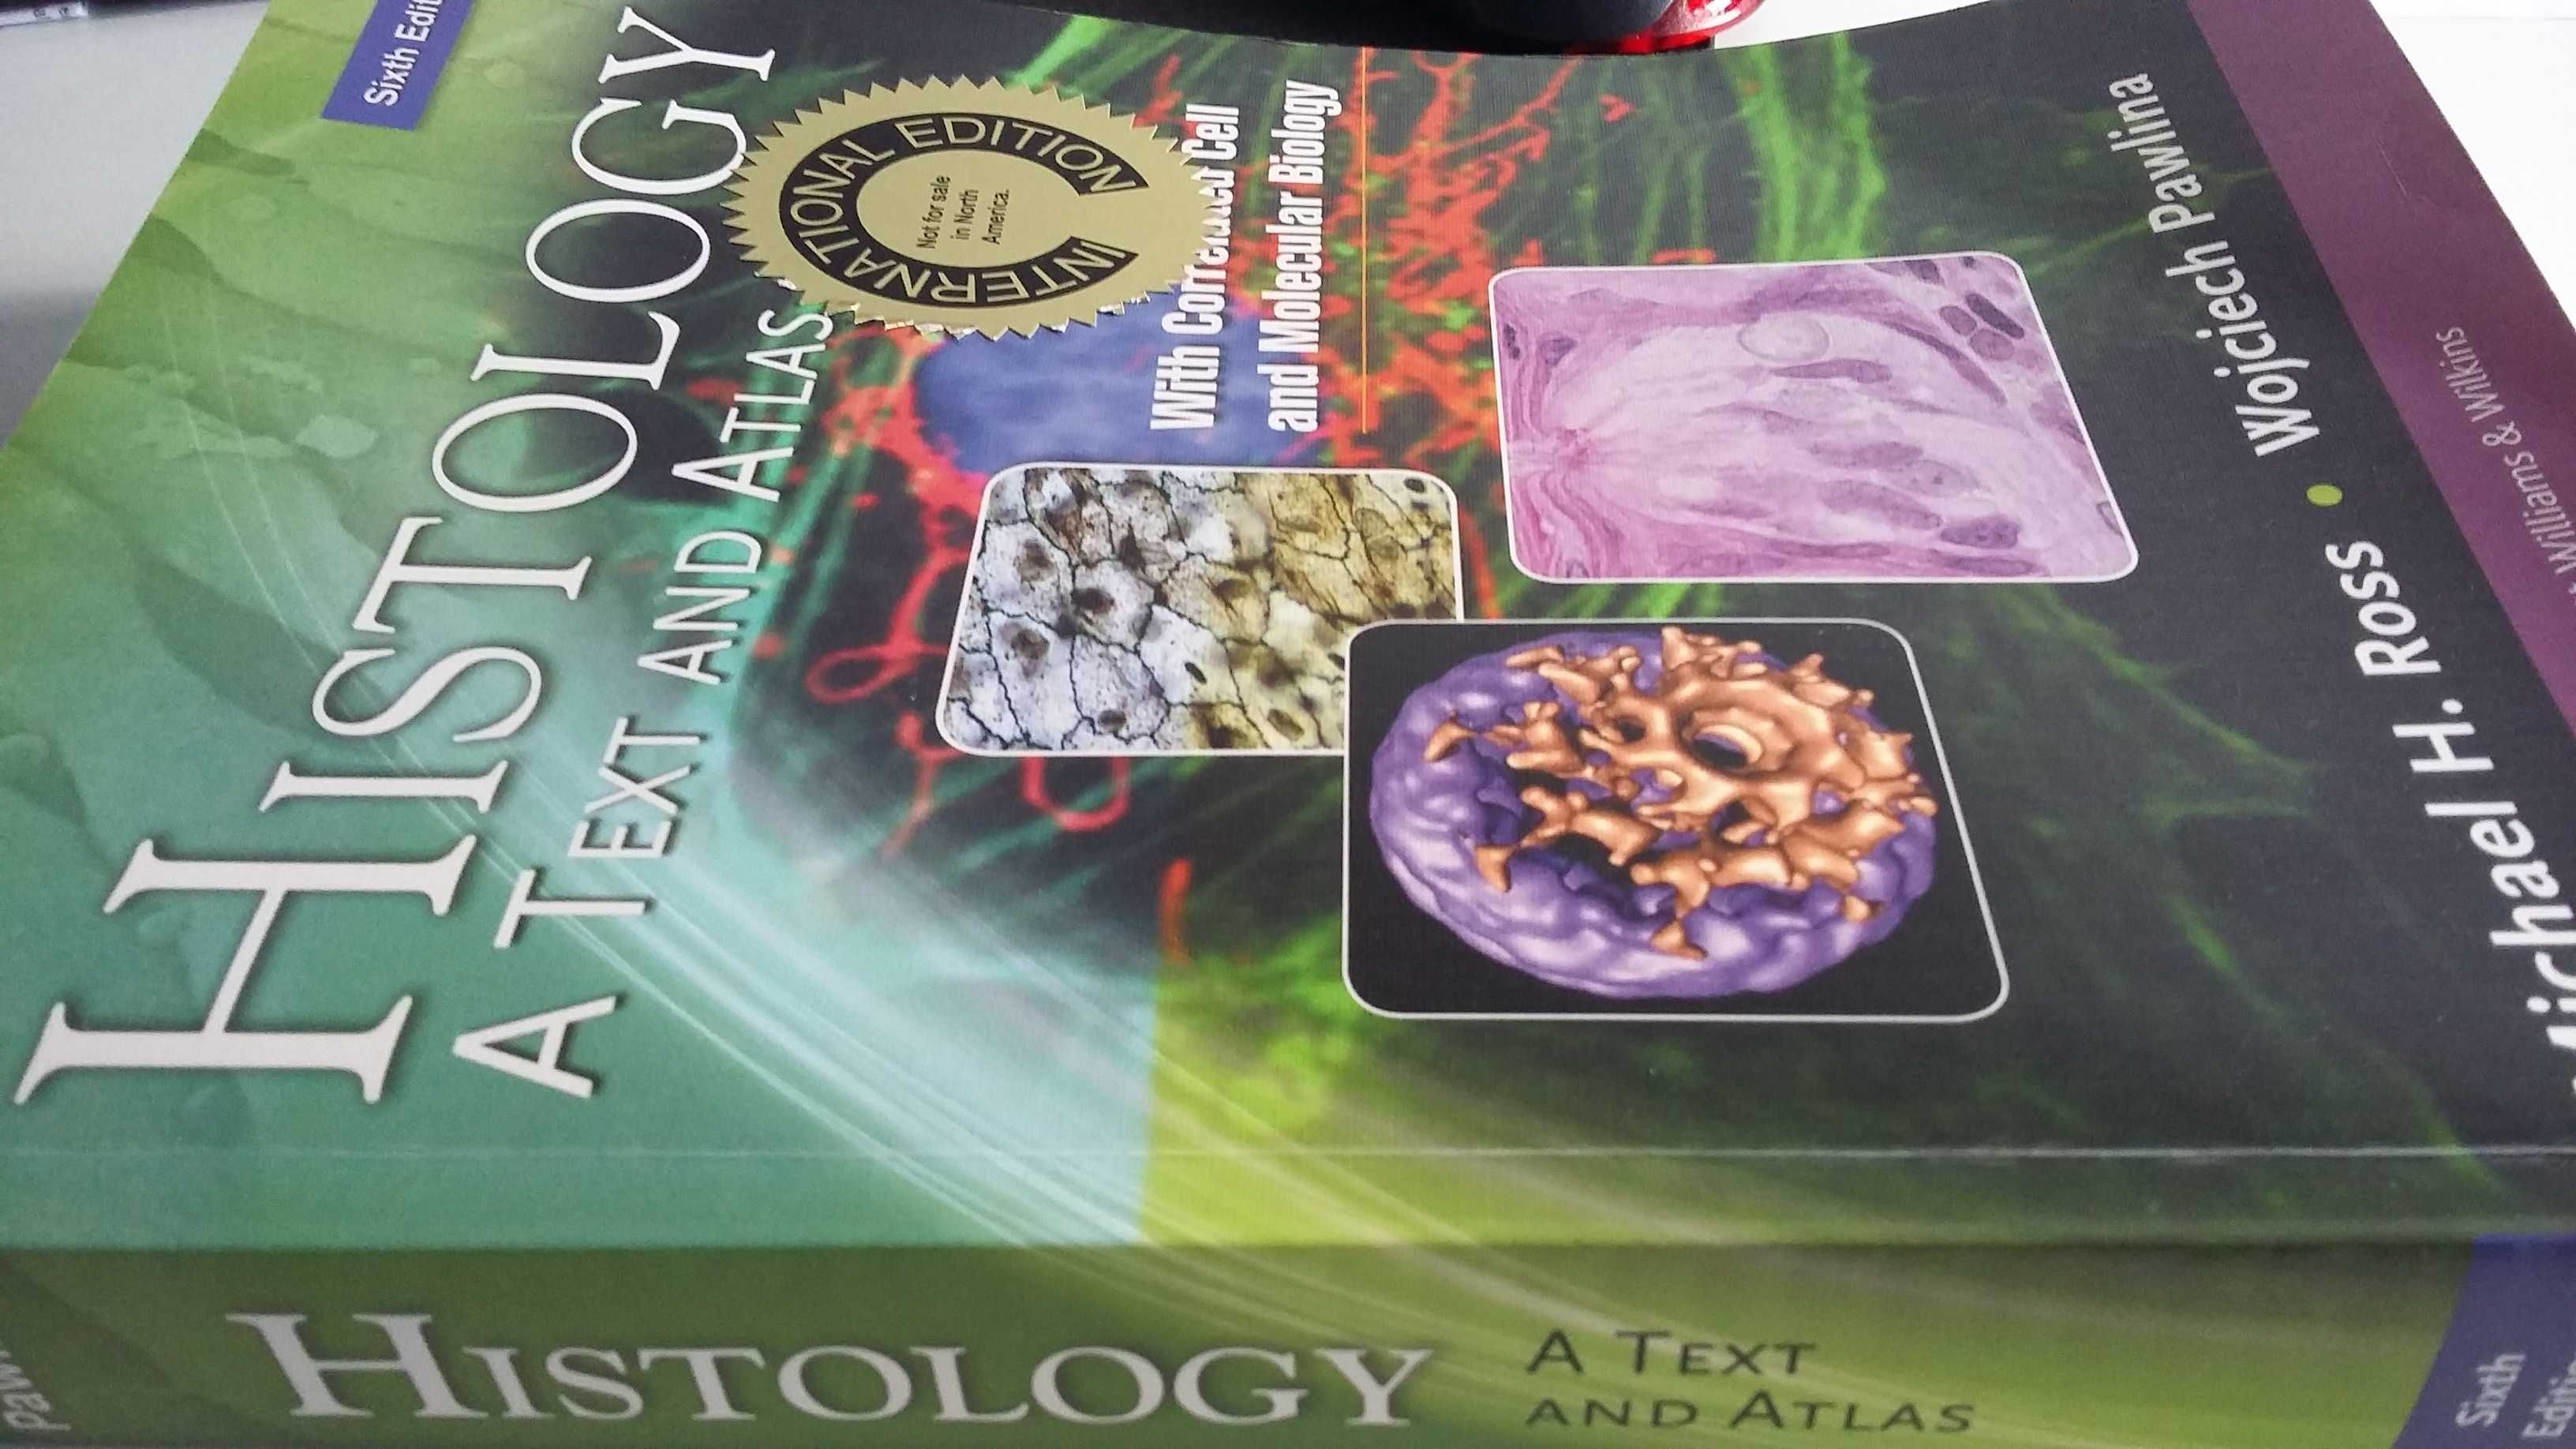 Ross Histology Text and Atlas